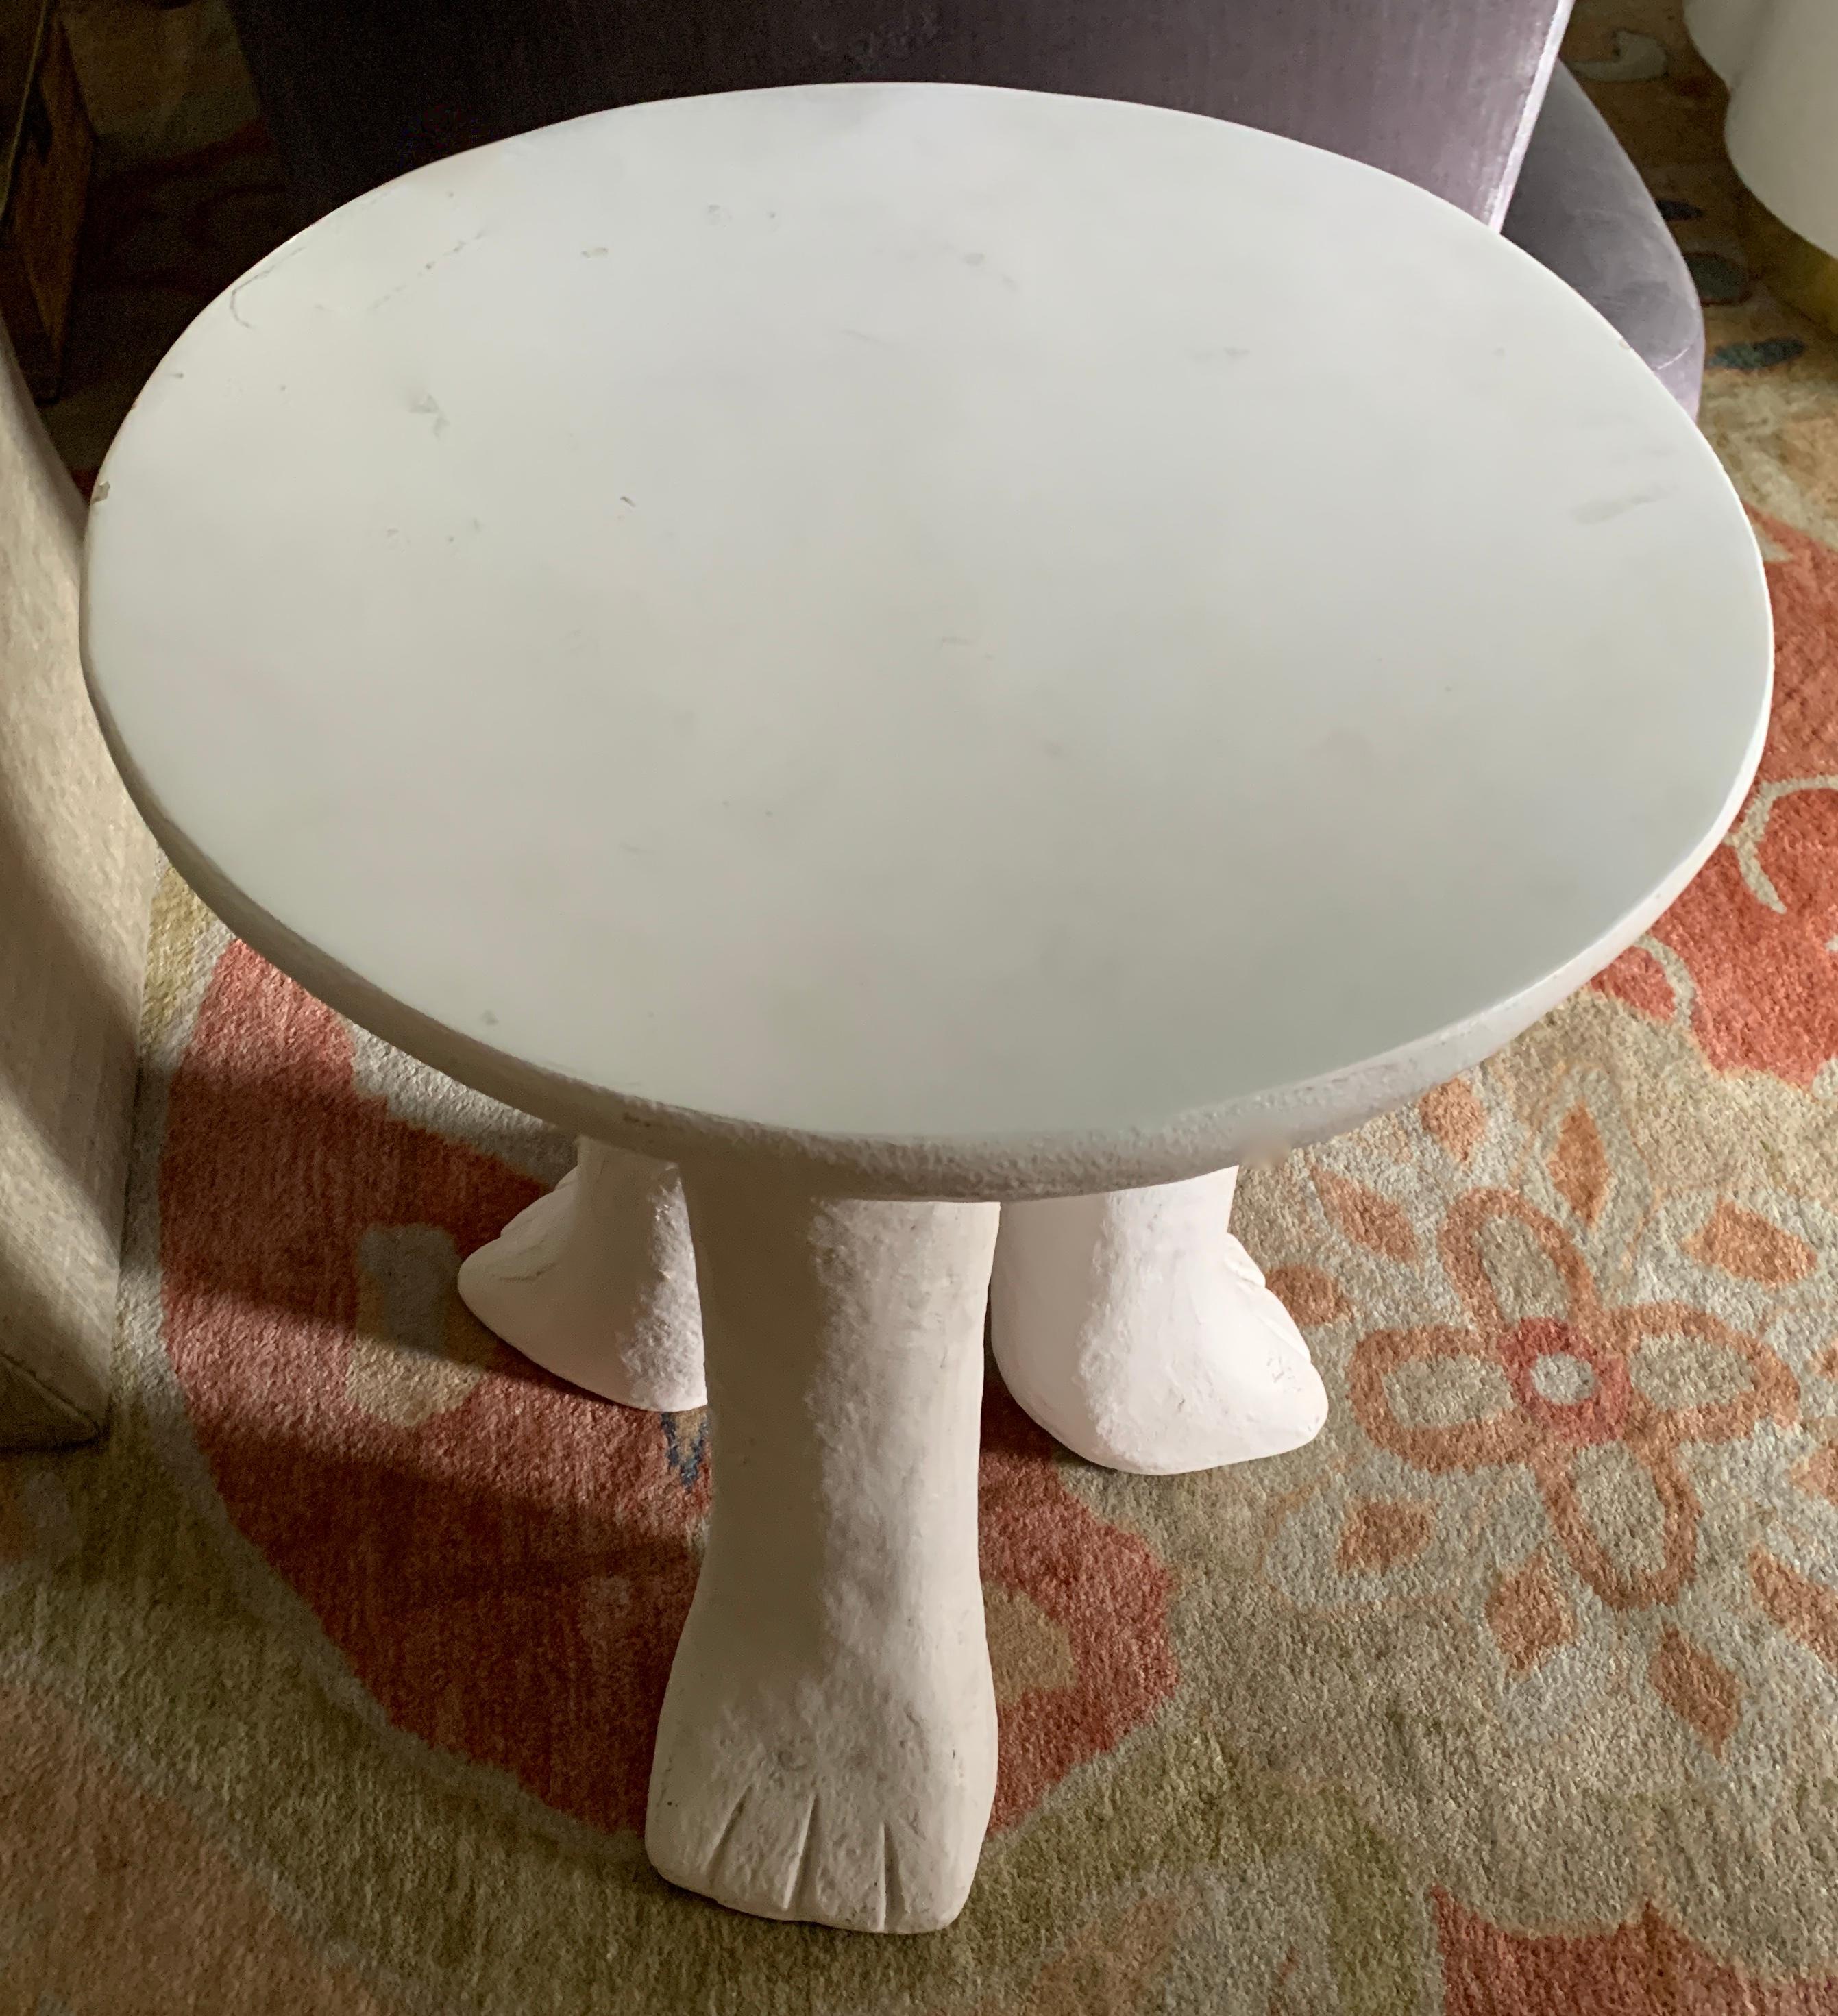 John Dickinson attributed Africa side table, the table is a wonderful example of John Dickinson, while we do not have authentication, and it is not the re-issue by Southerland, we do believe it to be a Dickinson... never the less a wonderful side